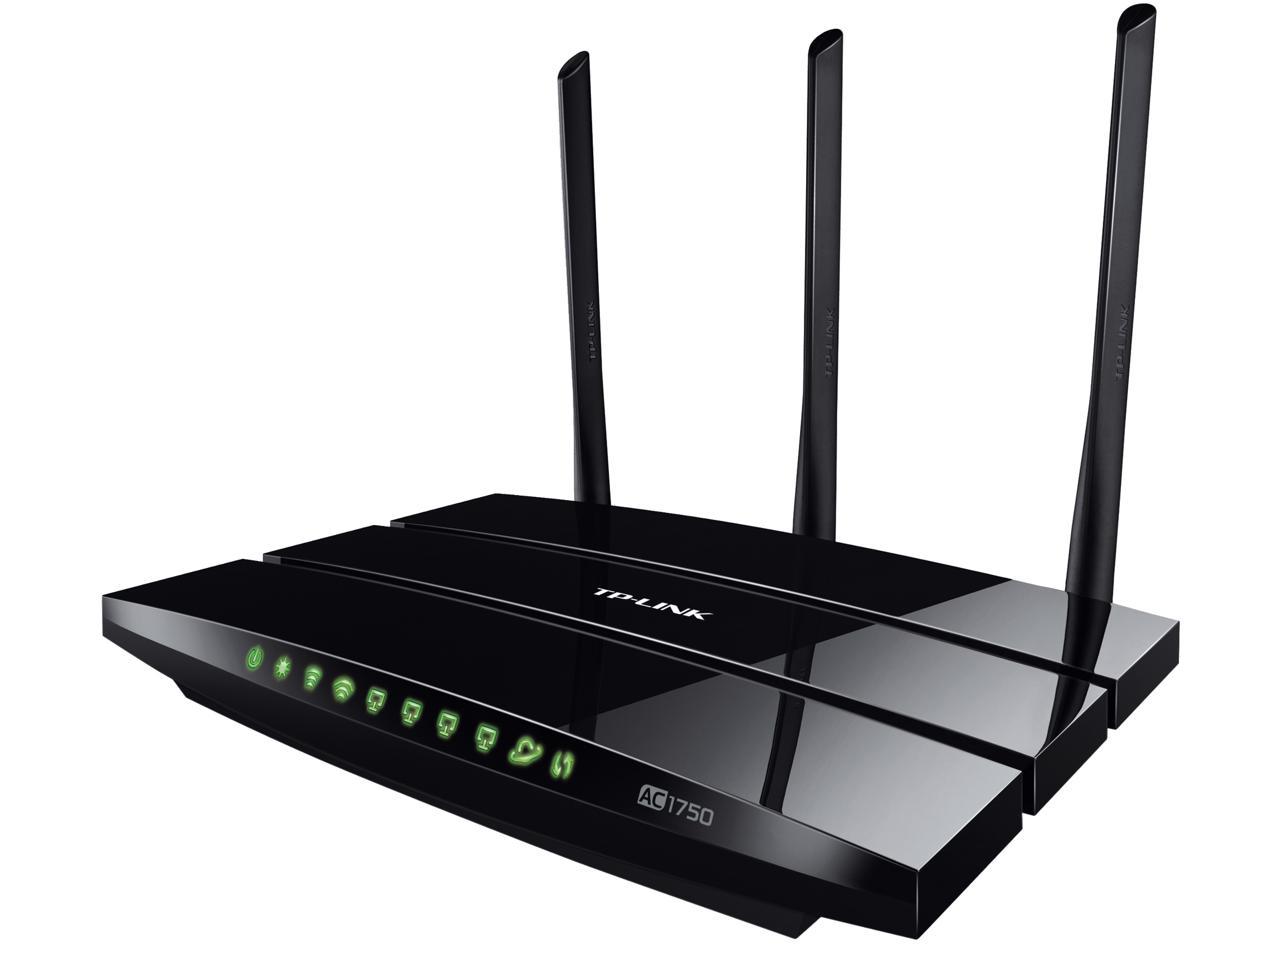 health Imperative Pioneer TP-LINK Archer C7 Wireless AC1750 Dual Band Gigabit Router, 450 Mbps on 2.4  GHz + 1300 Mbps on 5 GHz, 1 USB Port, IPv6, Guest Network - Newegg.com